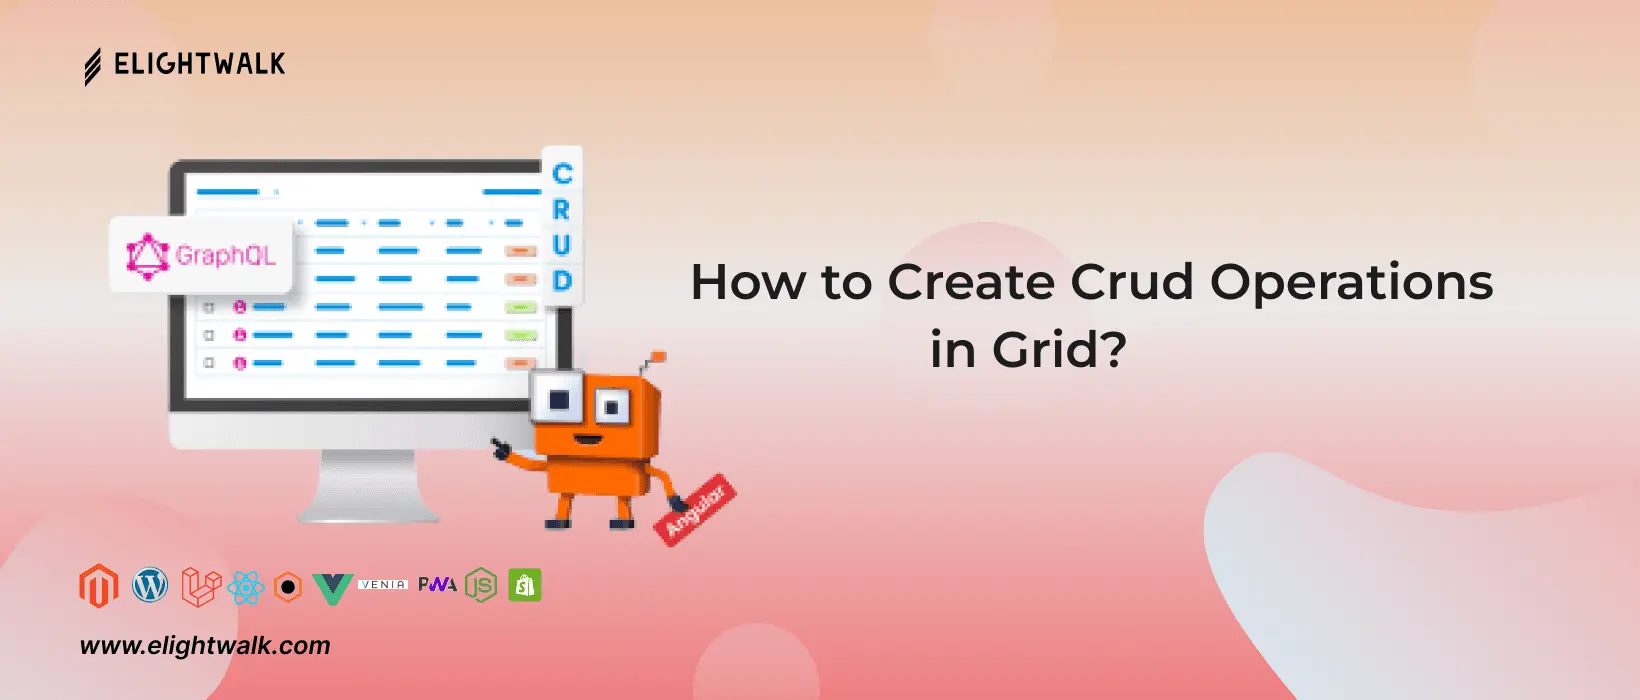 How to Create Crud Operations in Grid?